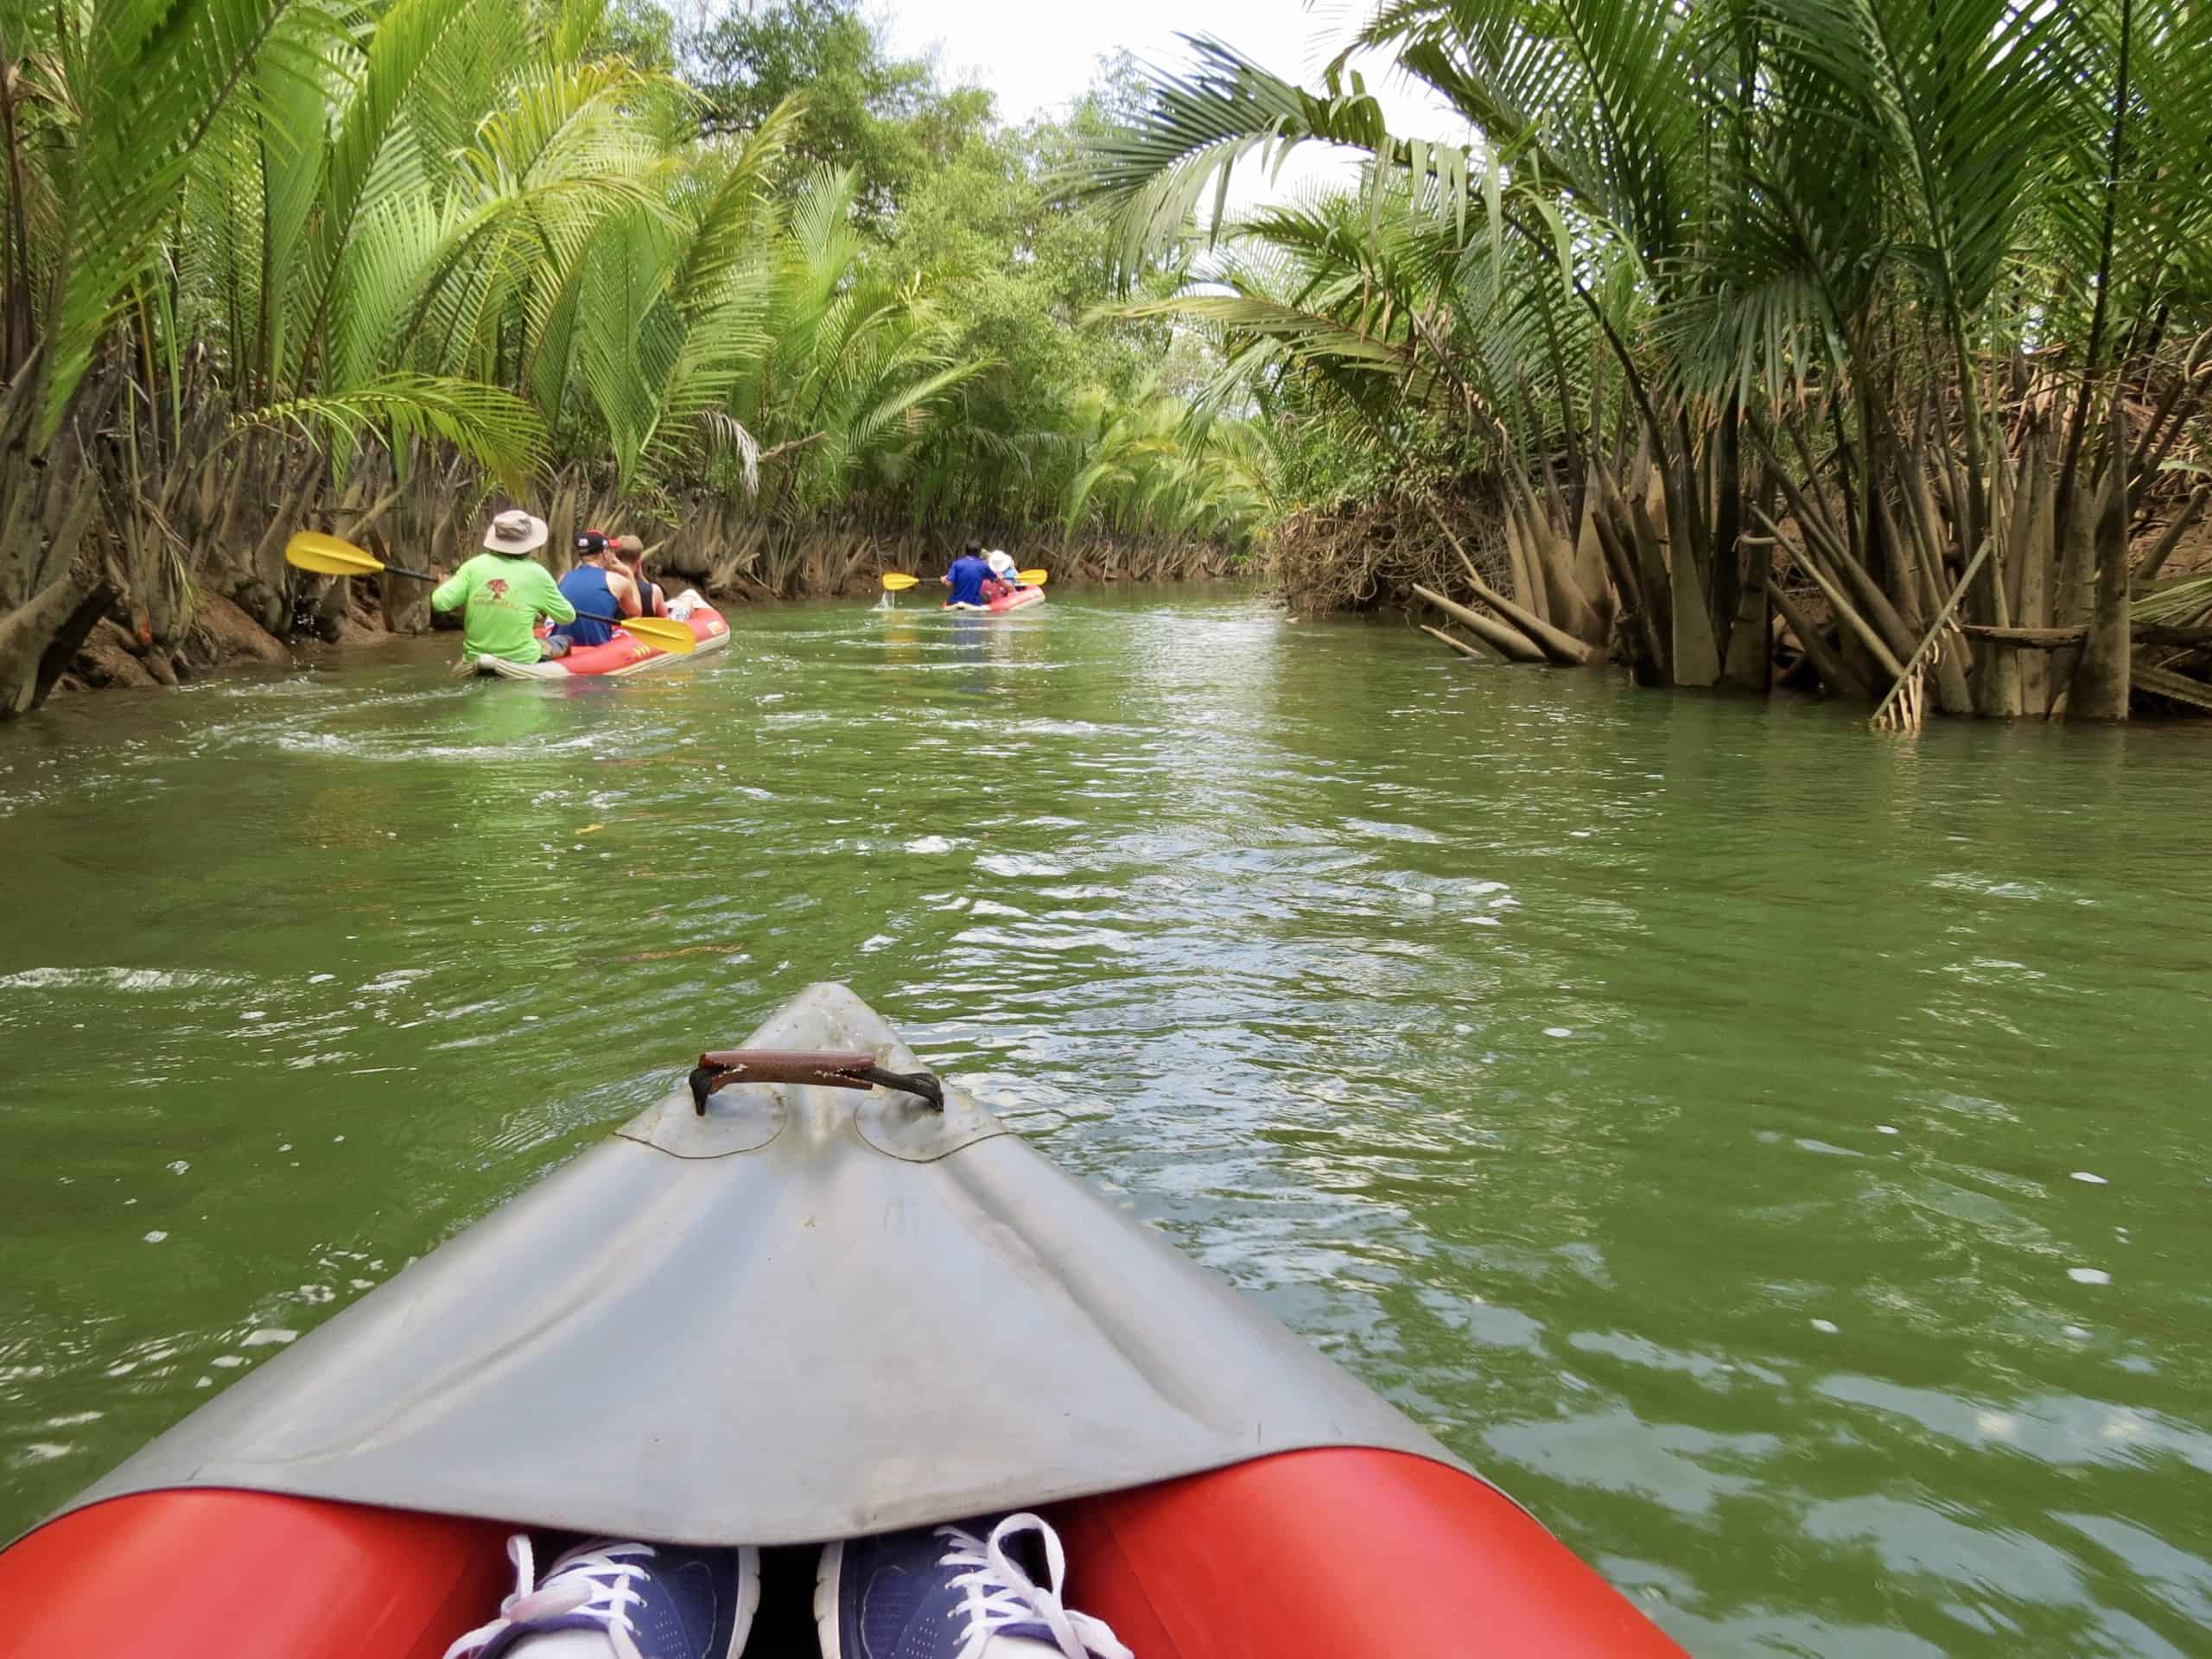 Little amazon river rafting is included in the Khao Lak Day trip excursion